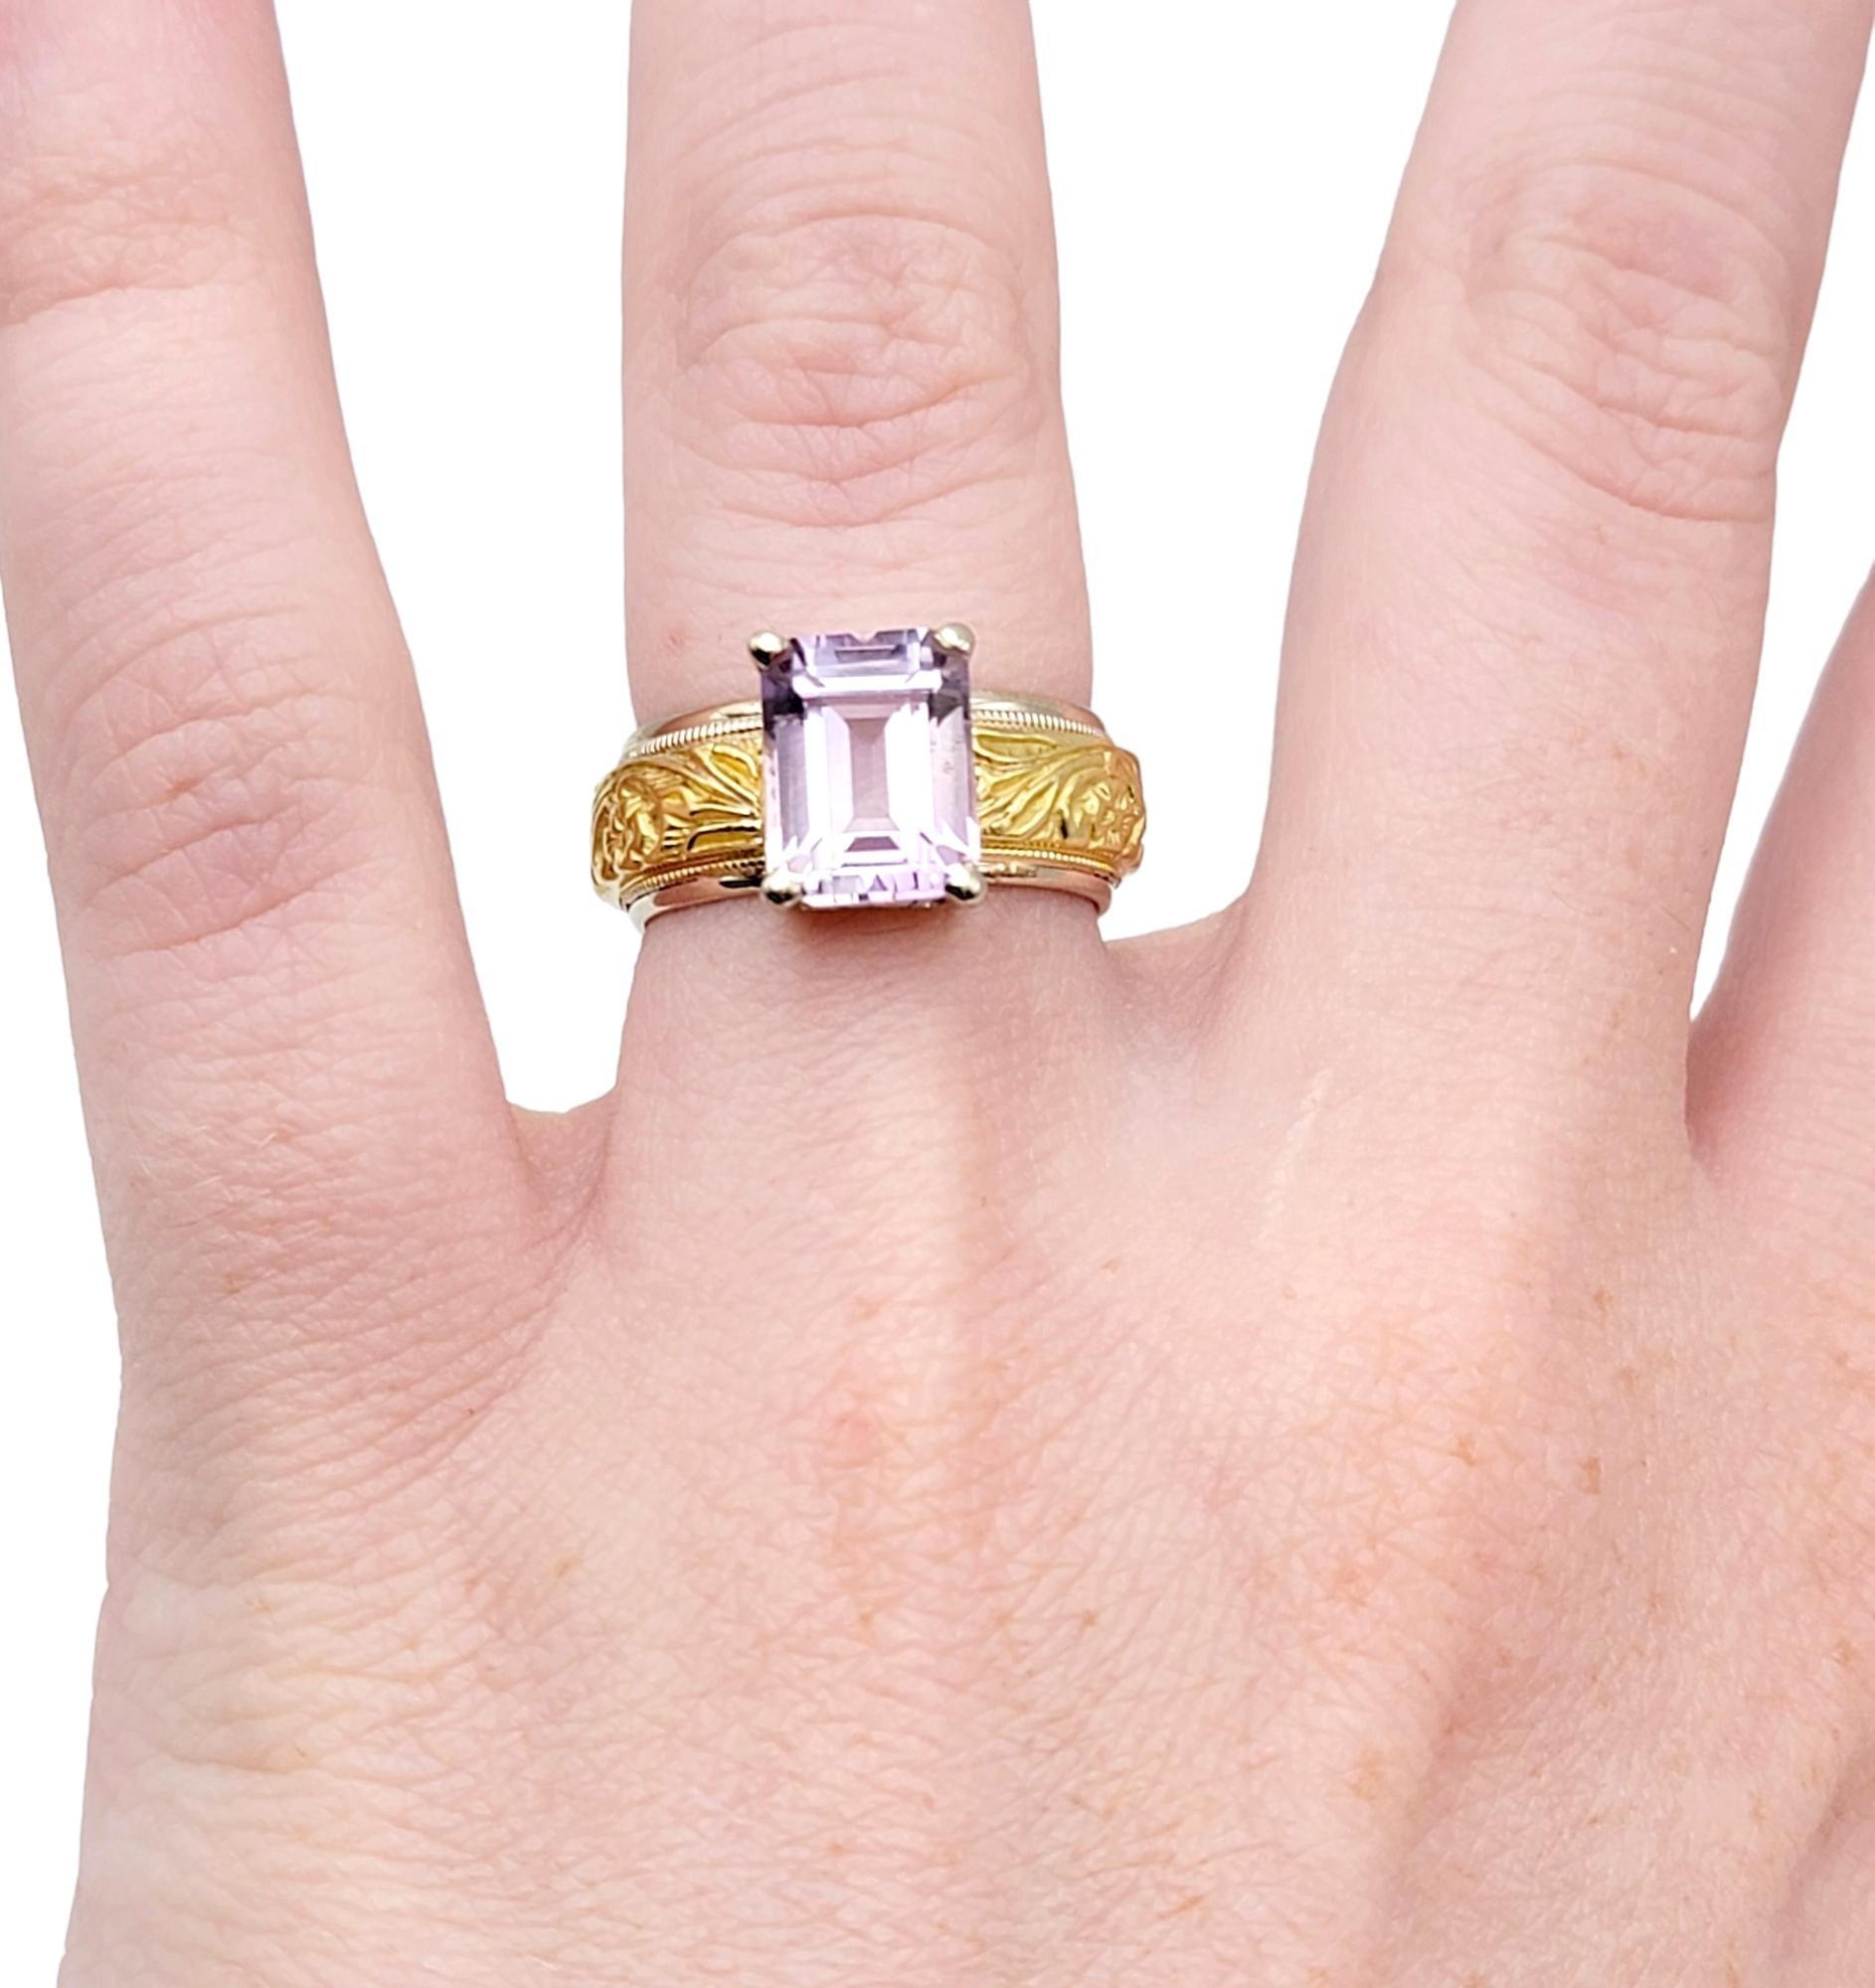 Emerald Cut Amethyst Solitaire Ring with Ornate Engraved Band in 18 Karat Gold For Sale 8